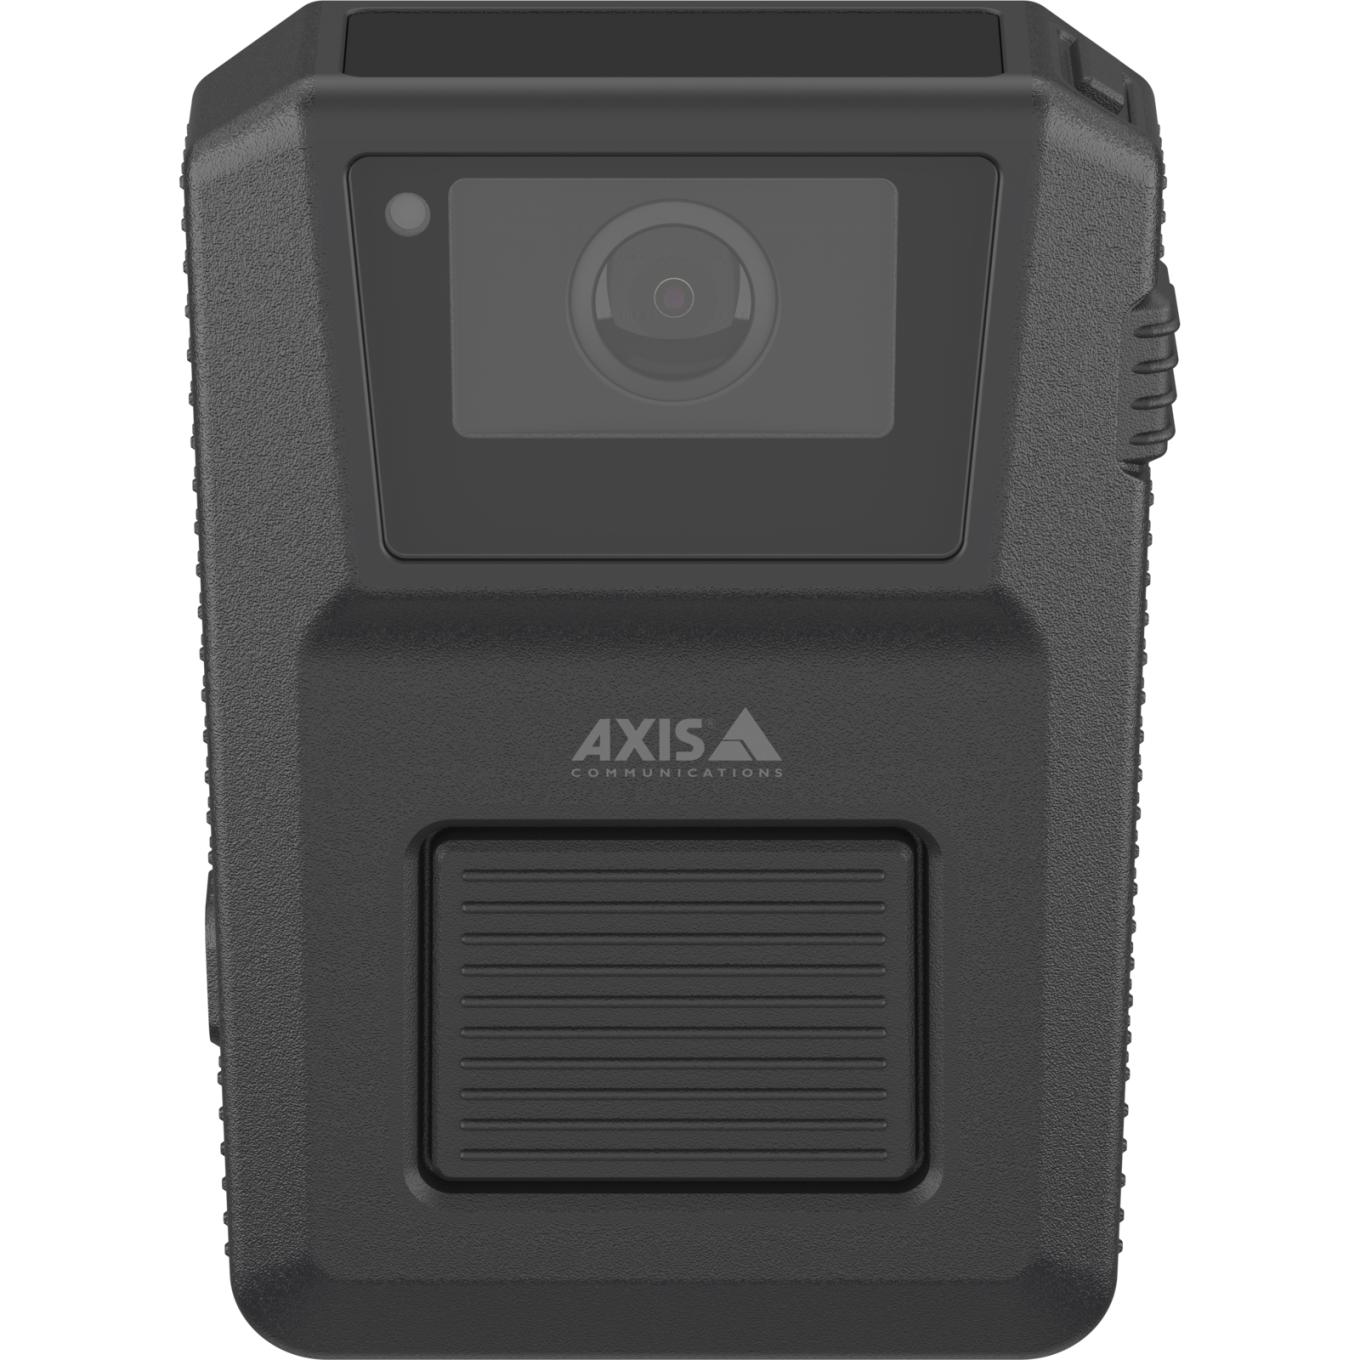 AXIS W120 Body Worn Camera, viewed from its front